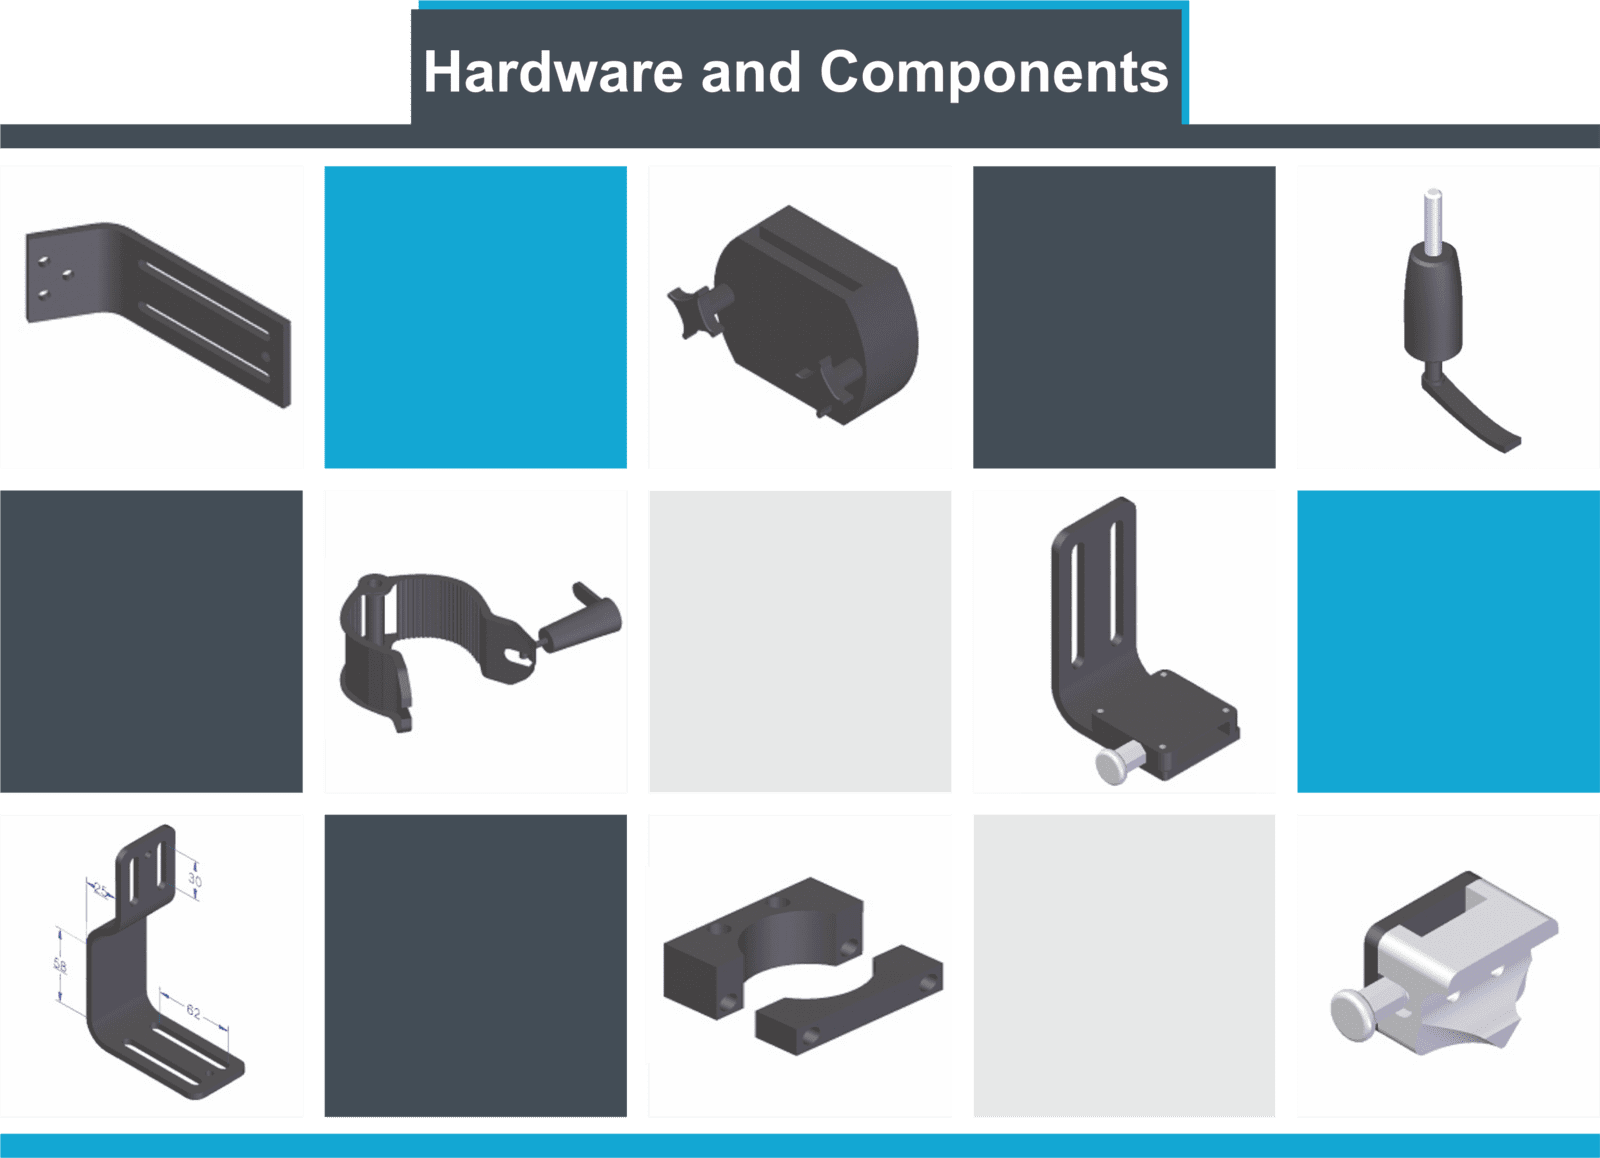 Hardware and Components